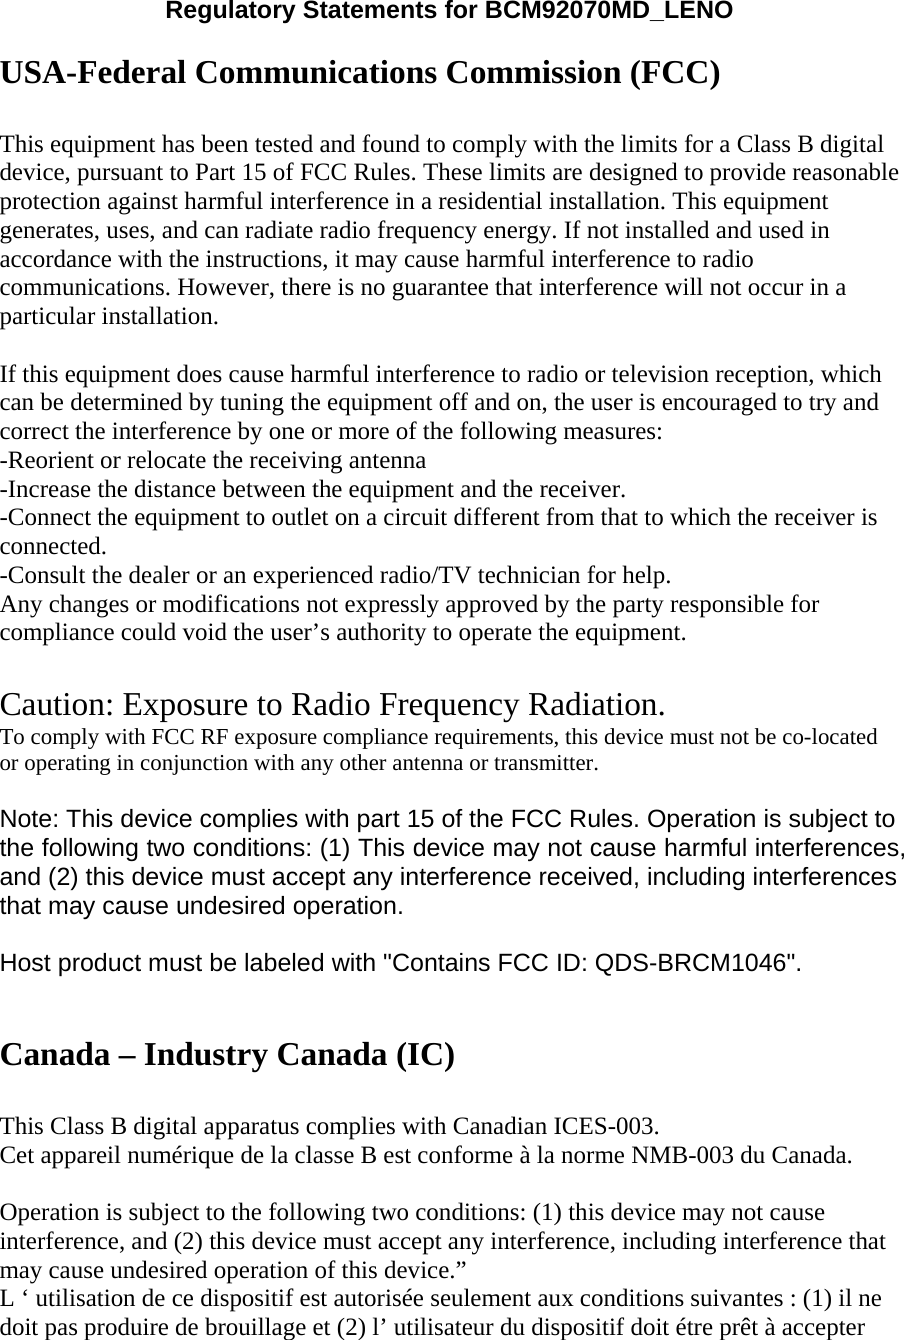 Regulatory Statements for BCM92070MD_LENO  USA-Federal Communications Commission (FCC)   This equipment has been tested and found to comply with the limits for a Class B digital device, pursuant to Part 15 of FCC Rules. These limits are designed to provide reasonable protection against harmful interference in a residential installation. This equipment generates, uses, and can radiate radio frequency energy. If not installed and used in accordance with the instructions, it may cause harmful interference to radio communications. However, there is no guarantee that interference will not occur in a particular installation.  If this equipment does cause harmful interference to radio or television reception, which can be determined by tuning the equipment off and on, the user is encouraged to try and correct the interference by one or more of the following measures:   -Reorient or relocate the receiving antenna -Increase the distance between the equipment and the receiver. -Connect the equipment to outlet on a circuit different from that to which the receiver is connected. -Consult the dealer or an experienced radio/TV technician for help. Any changes or modifications not expressly approved by the party responsible for compliance could void the user’s authority to operate the equipment.  Caution: Exposure to Radio Frequency Radiation. To comply with FCC RF exposure compliance requirements, this device must not be co-located or operating in conjunction with any other antenna or transmitter.  Note: This device complies with part 15 of the FCC Rules. Operation is subject to the following two conditions: (1) This device may not cause harmful interferences, and (2) this device must accept any interference received, including interferences that may cause undesired operation.  Host product must be labeled with &quot;Contains FCC ID: QDS-BRCM1046&quot;.   Canada – Industry Canada (IC)  This Class B digital apparatus complies with Canadian ICES-003. Cet appareil numérique de la classe B est conforme à la norme NMB-003 du Canada.  Operation is subject to the following two conditions: (1) this device may not cause interference, and (2) this device must accept any interference, including interference that may cause undesired operation of this device.” L ‘ utilisation de ce dispositif est autorisée seulement aux conditions suivantes : (1) il ne doit pas produire de brouillage et (2) l’ utilisateur du dispositif doit étre prêt à accepter 